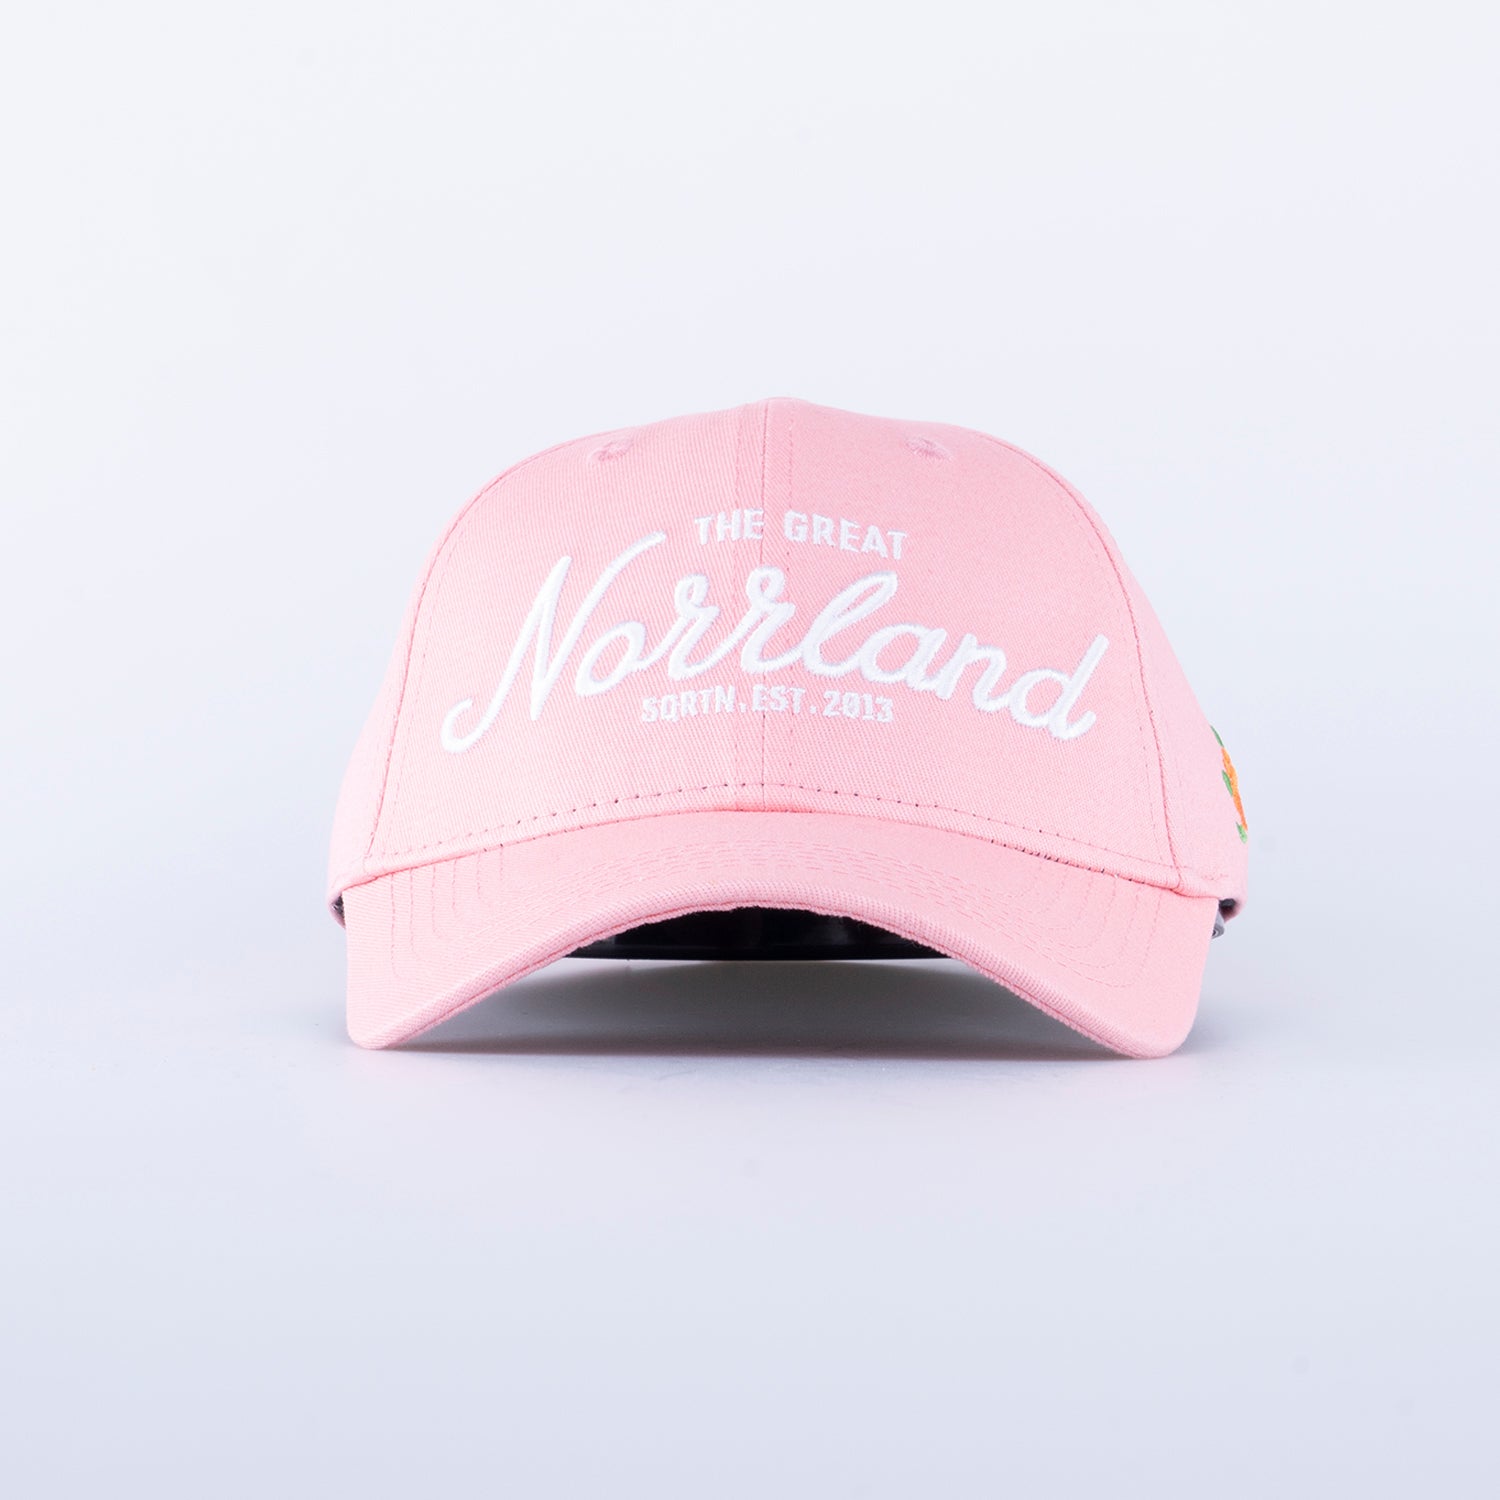 GREAT NORRLAND KEPS - HOOKED PINK